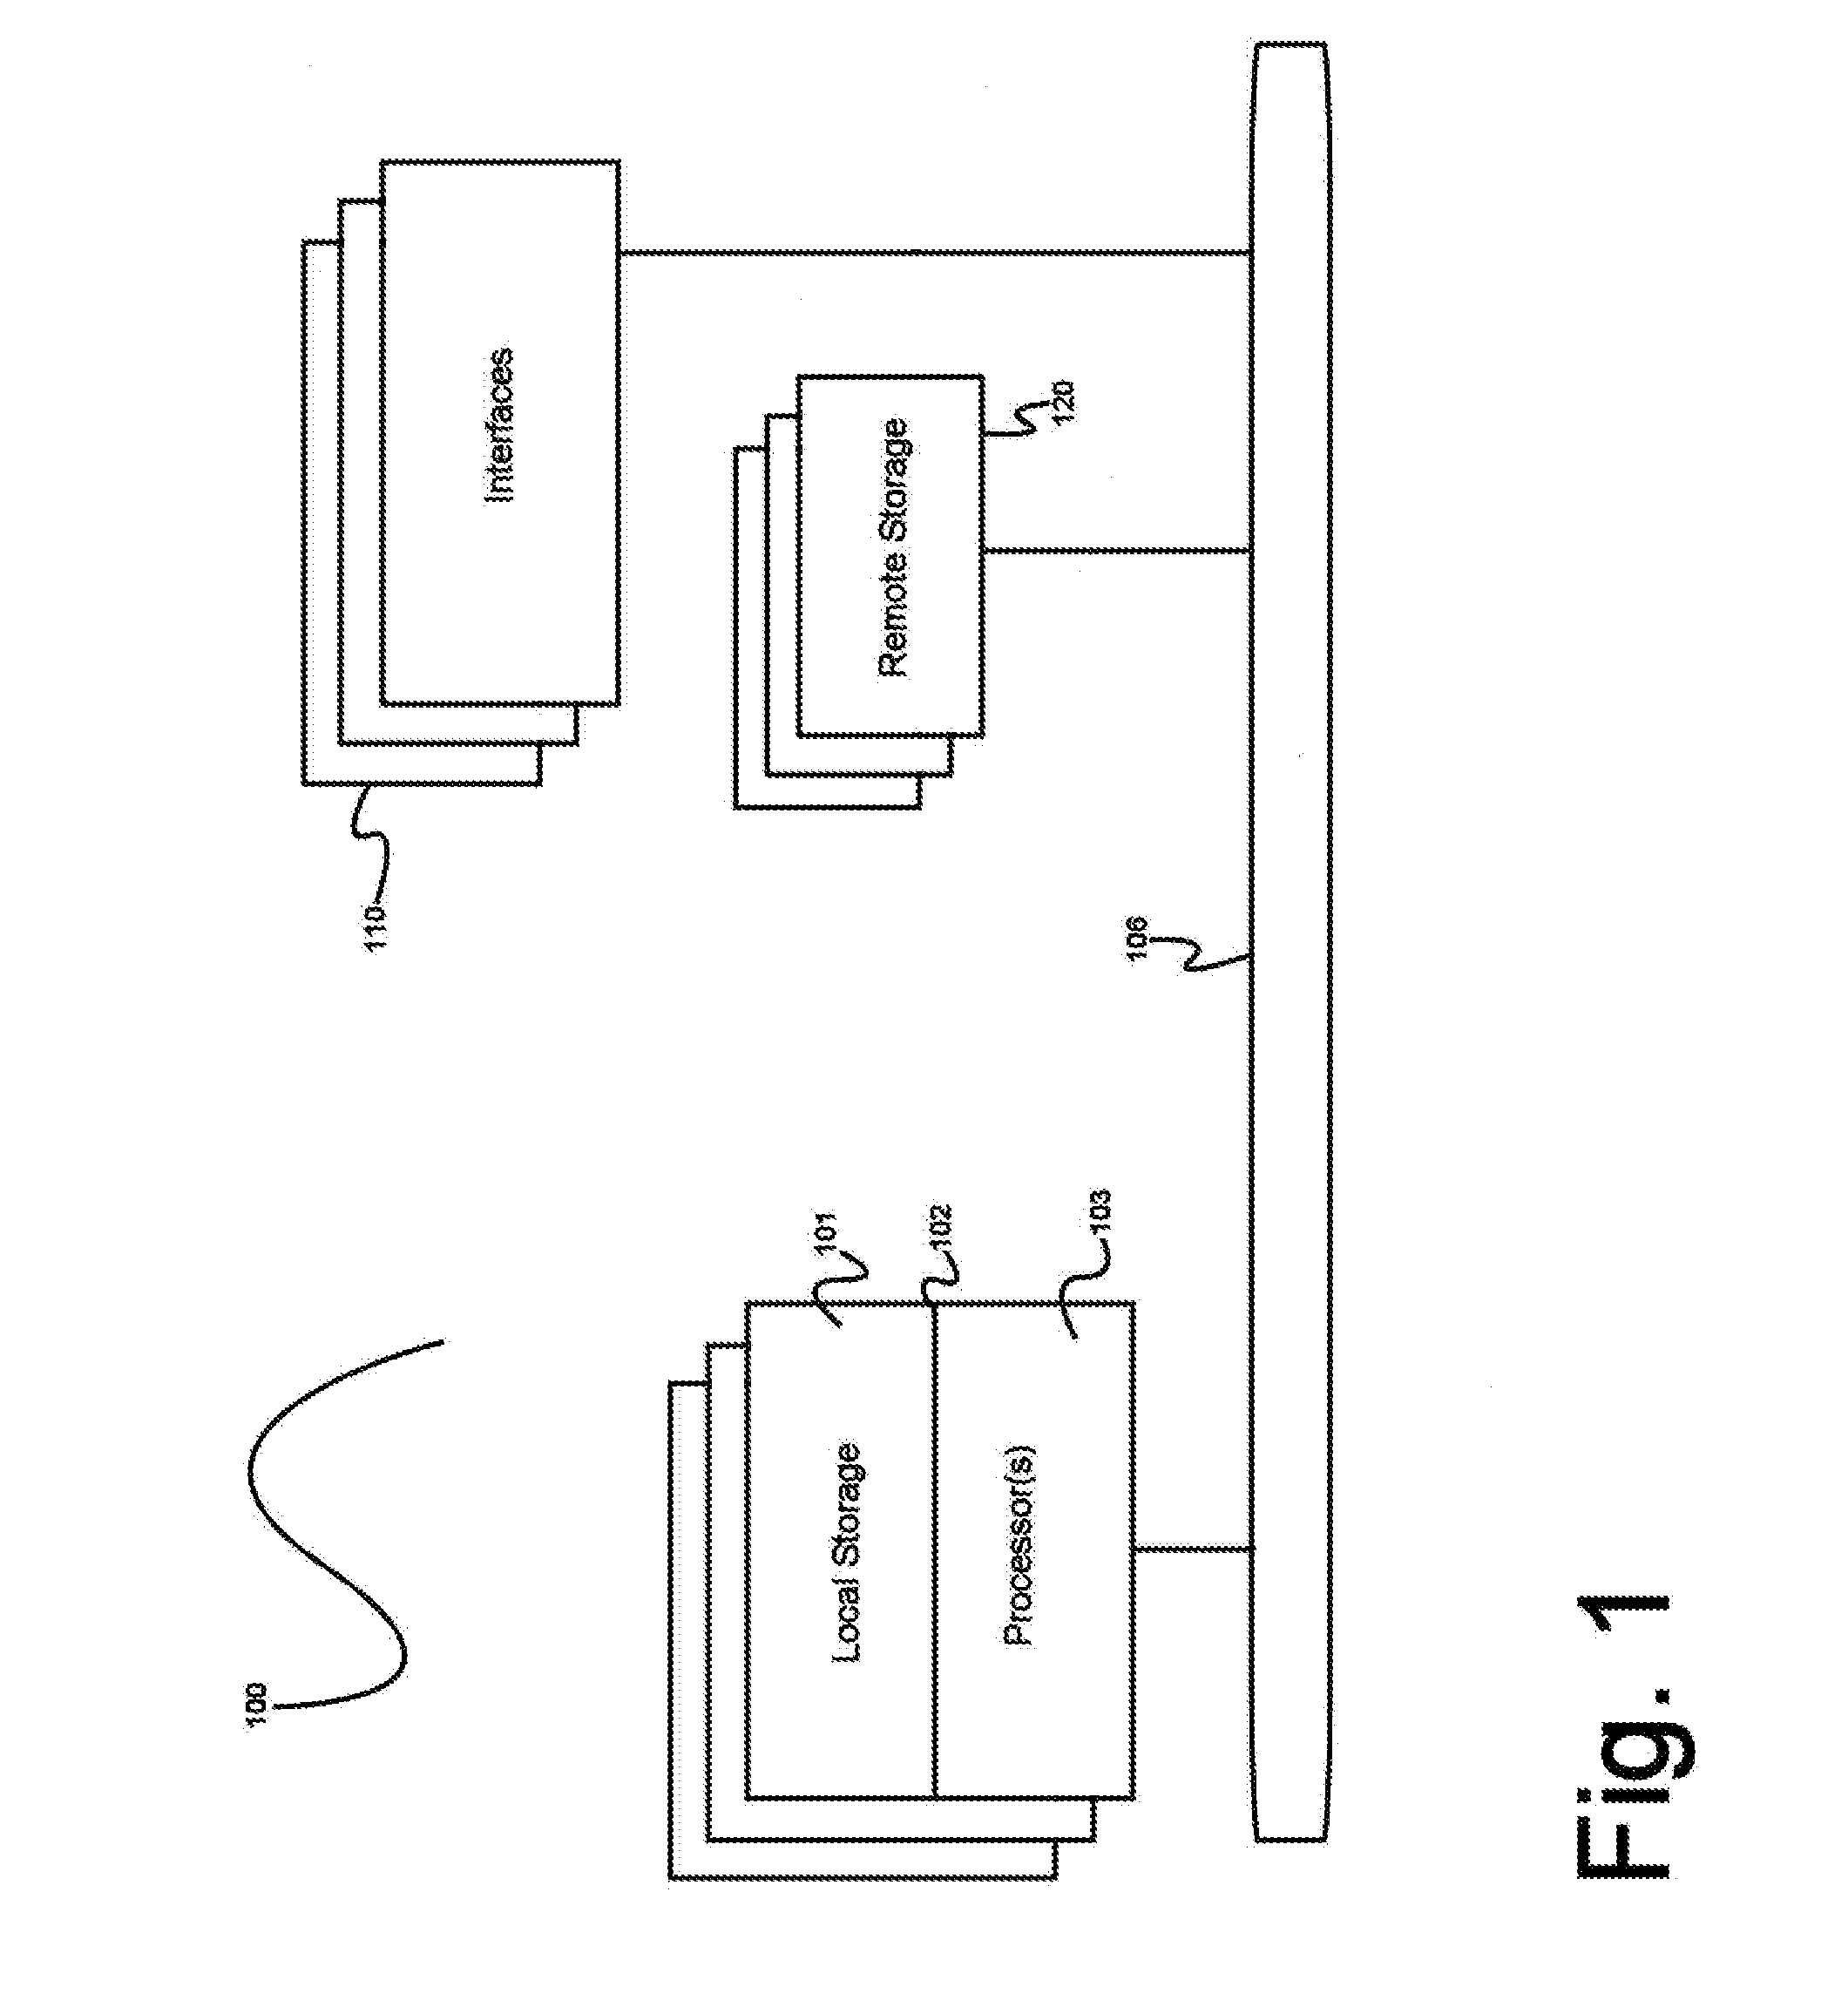 Shared experience and multi-device hardware platform